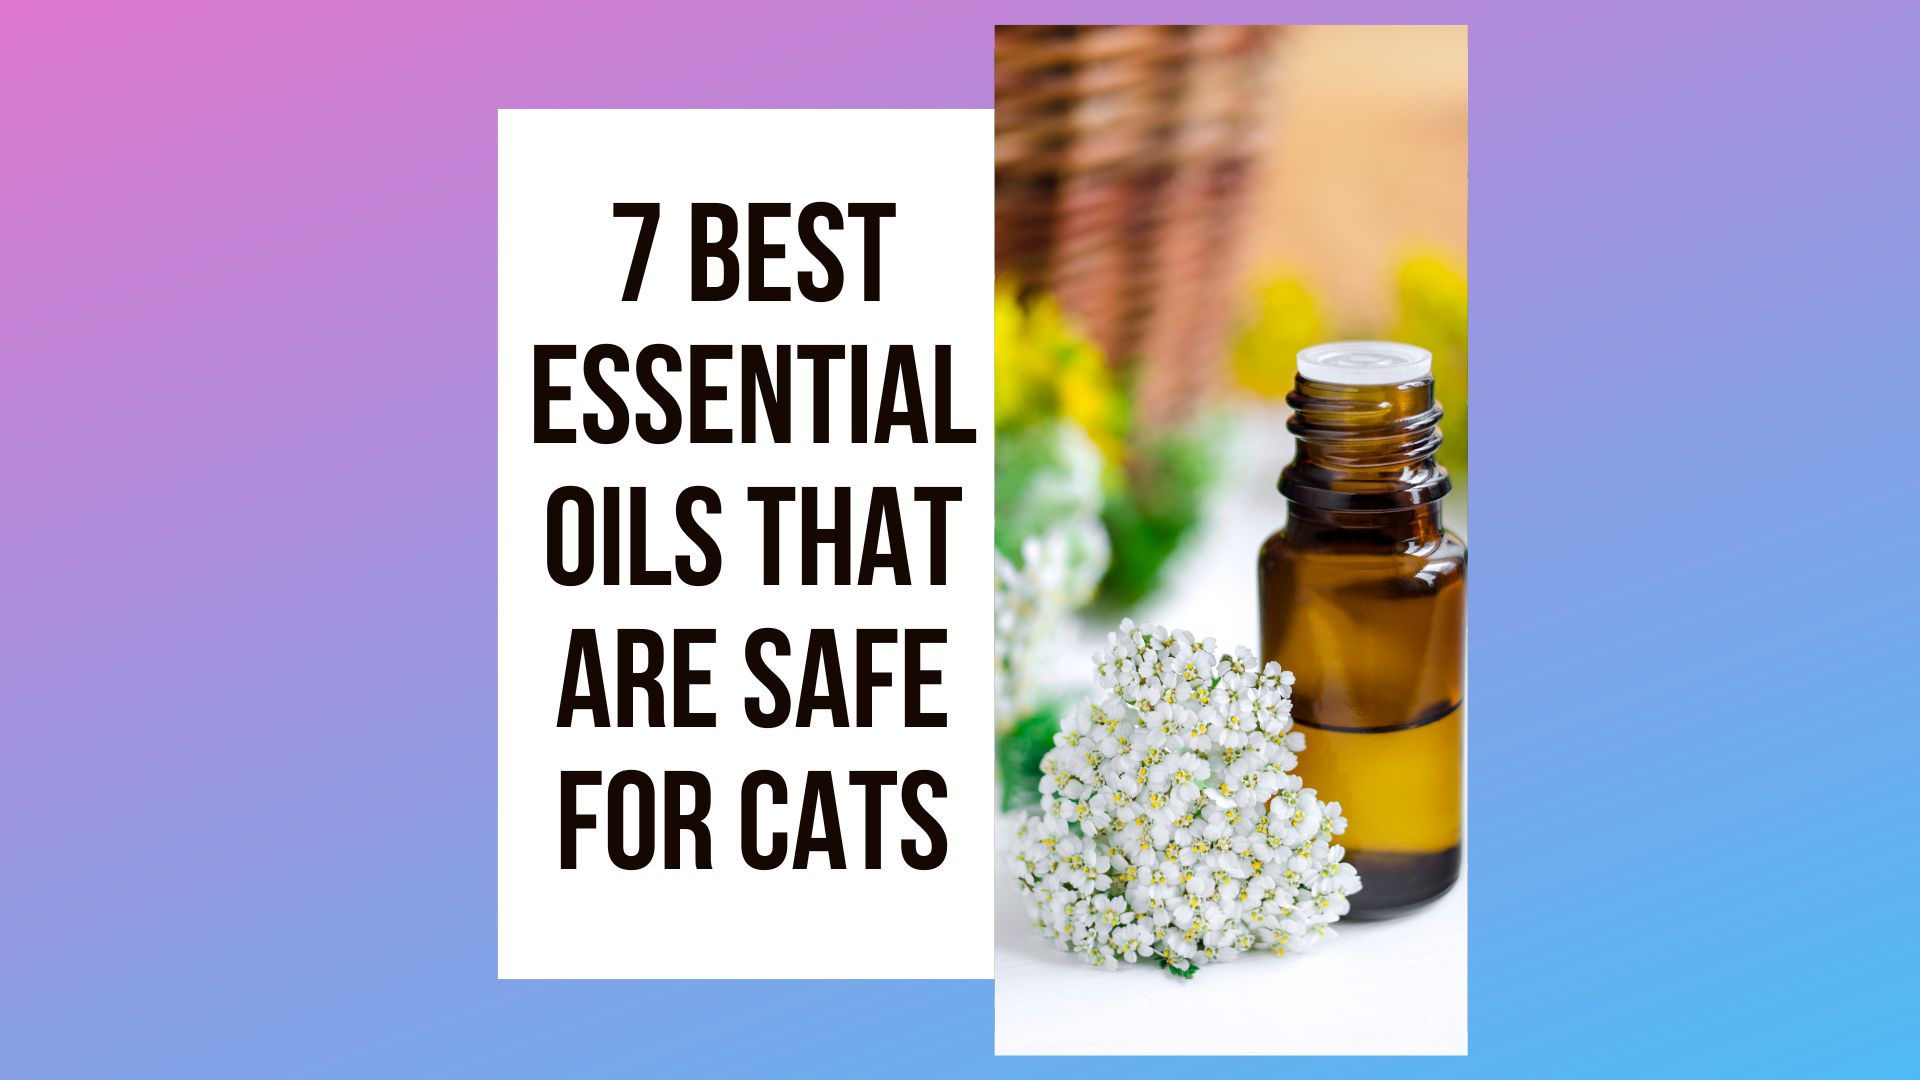 Essential Oils That Are Safe